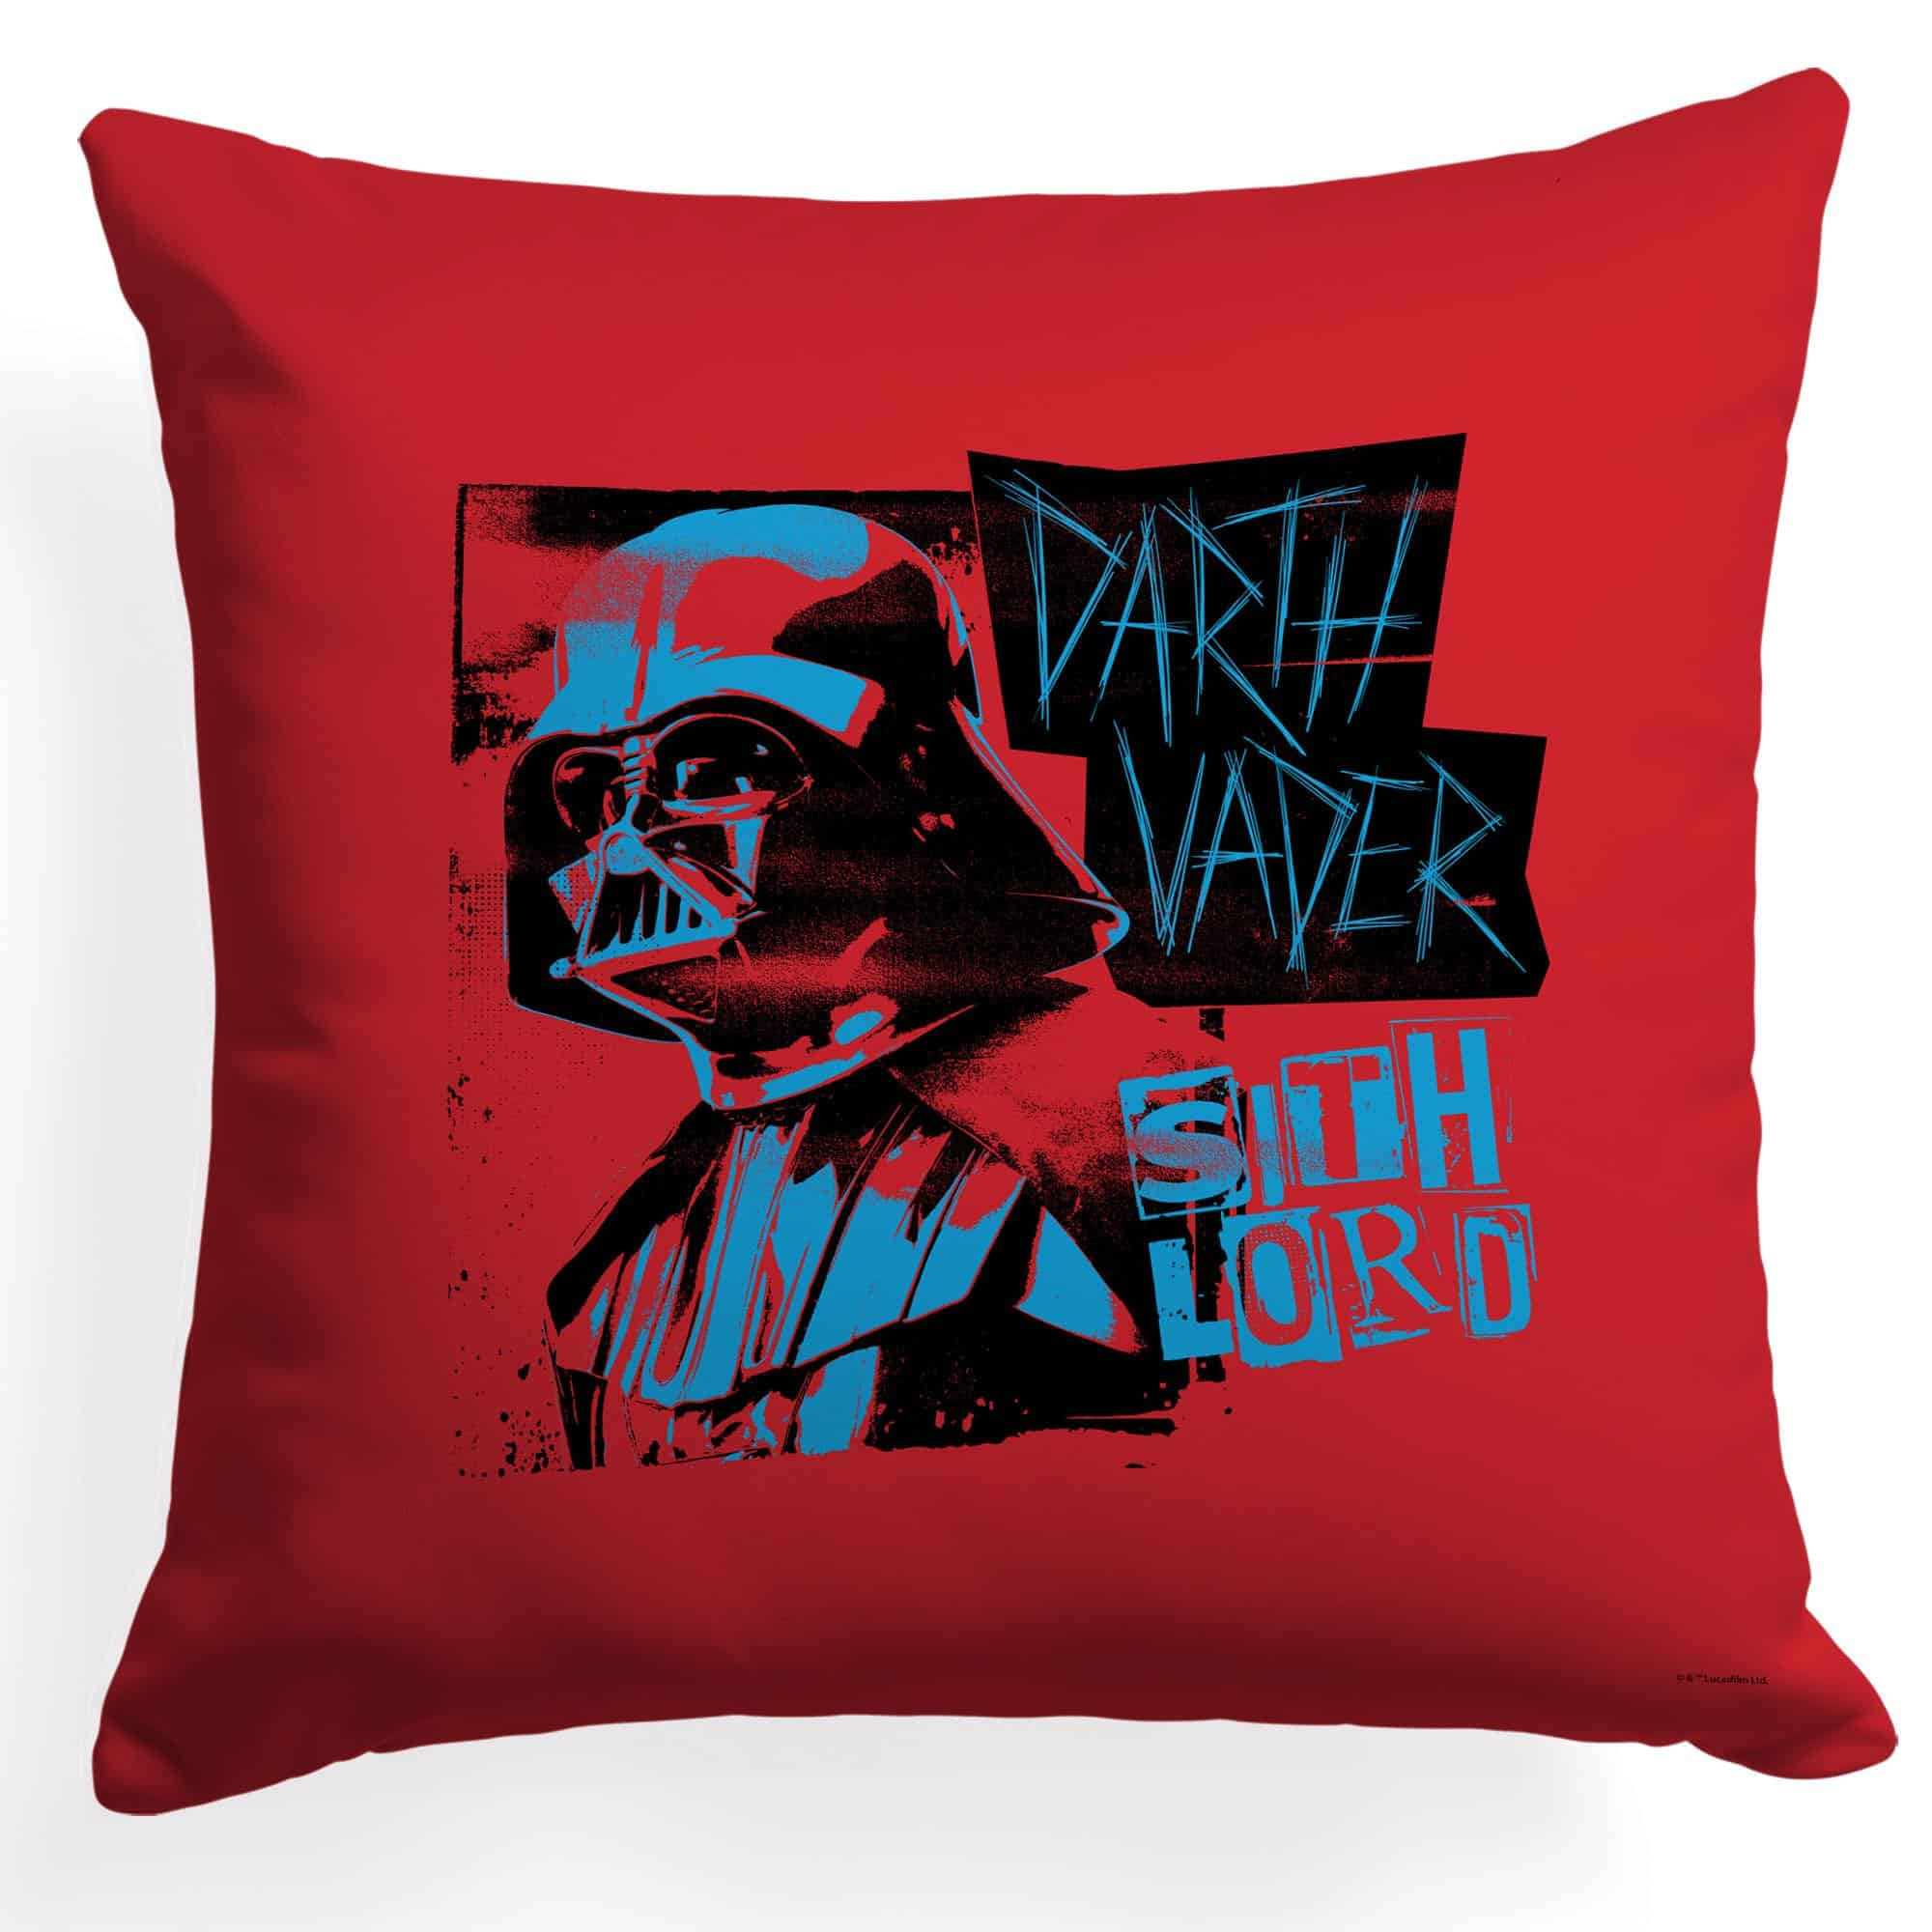 Star Wars, The Sith Lord Printed Throw Pillow